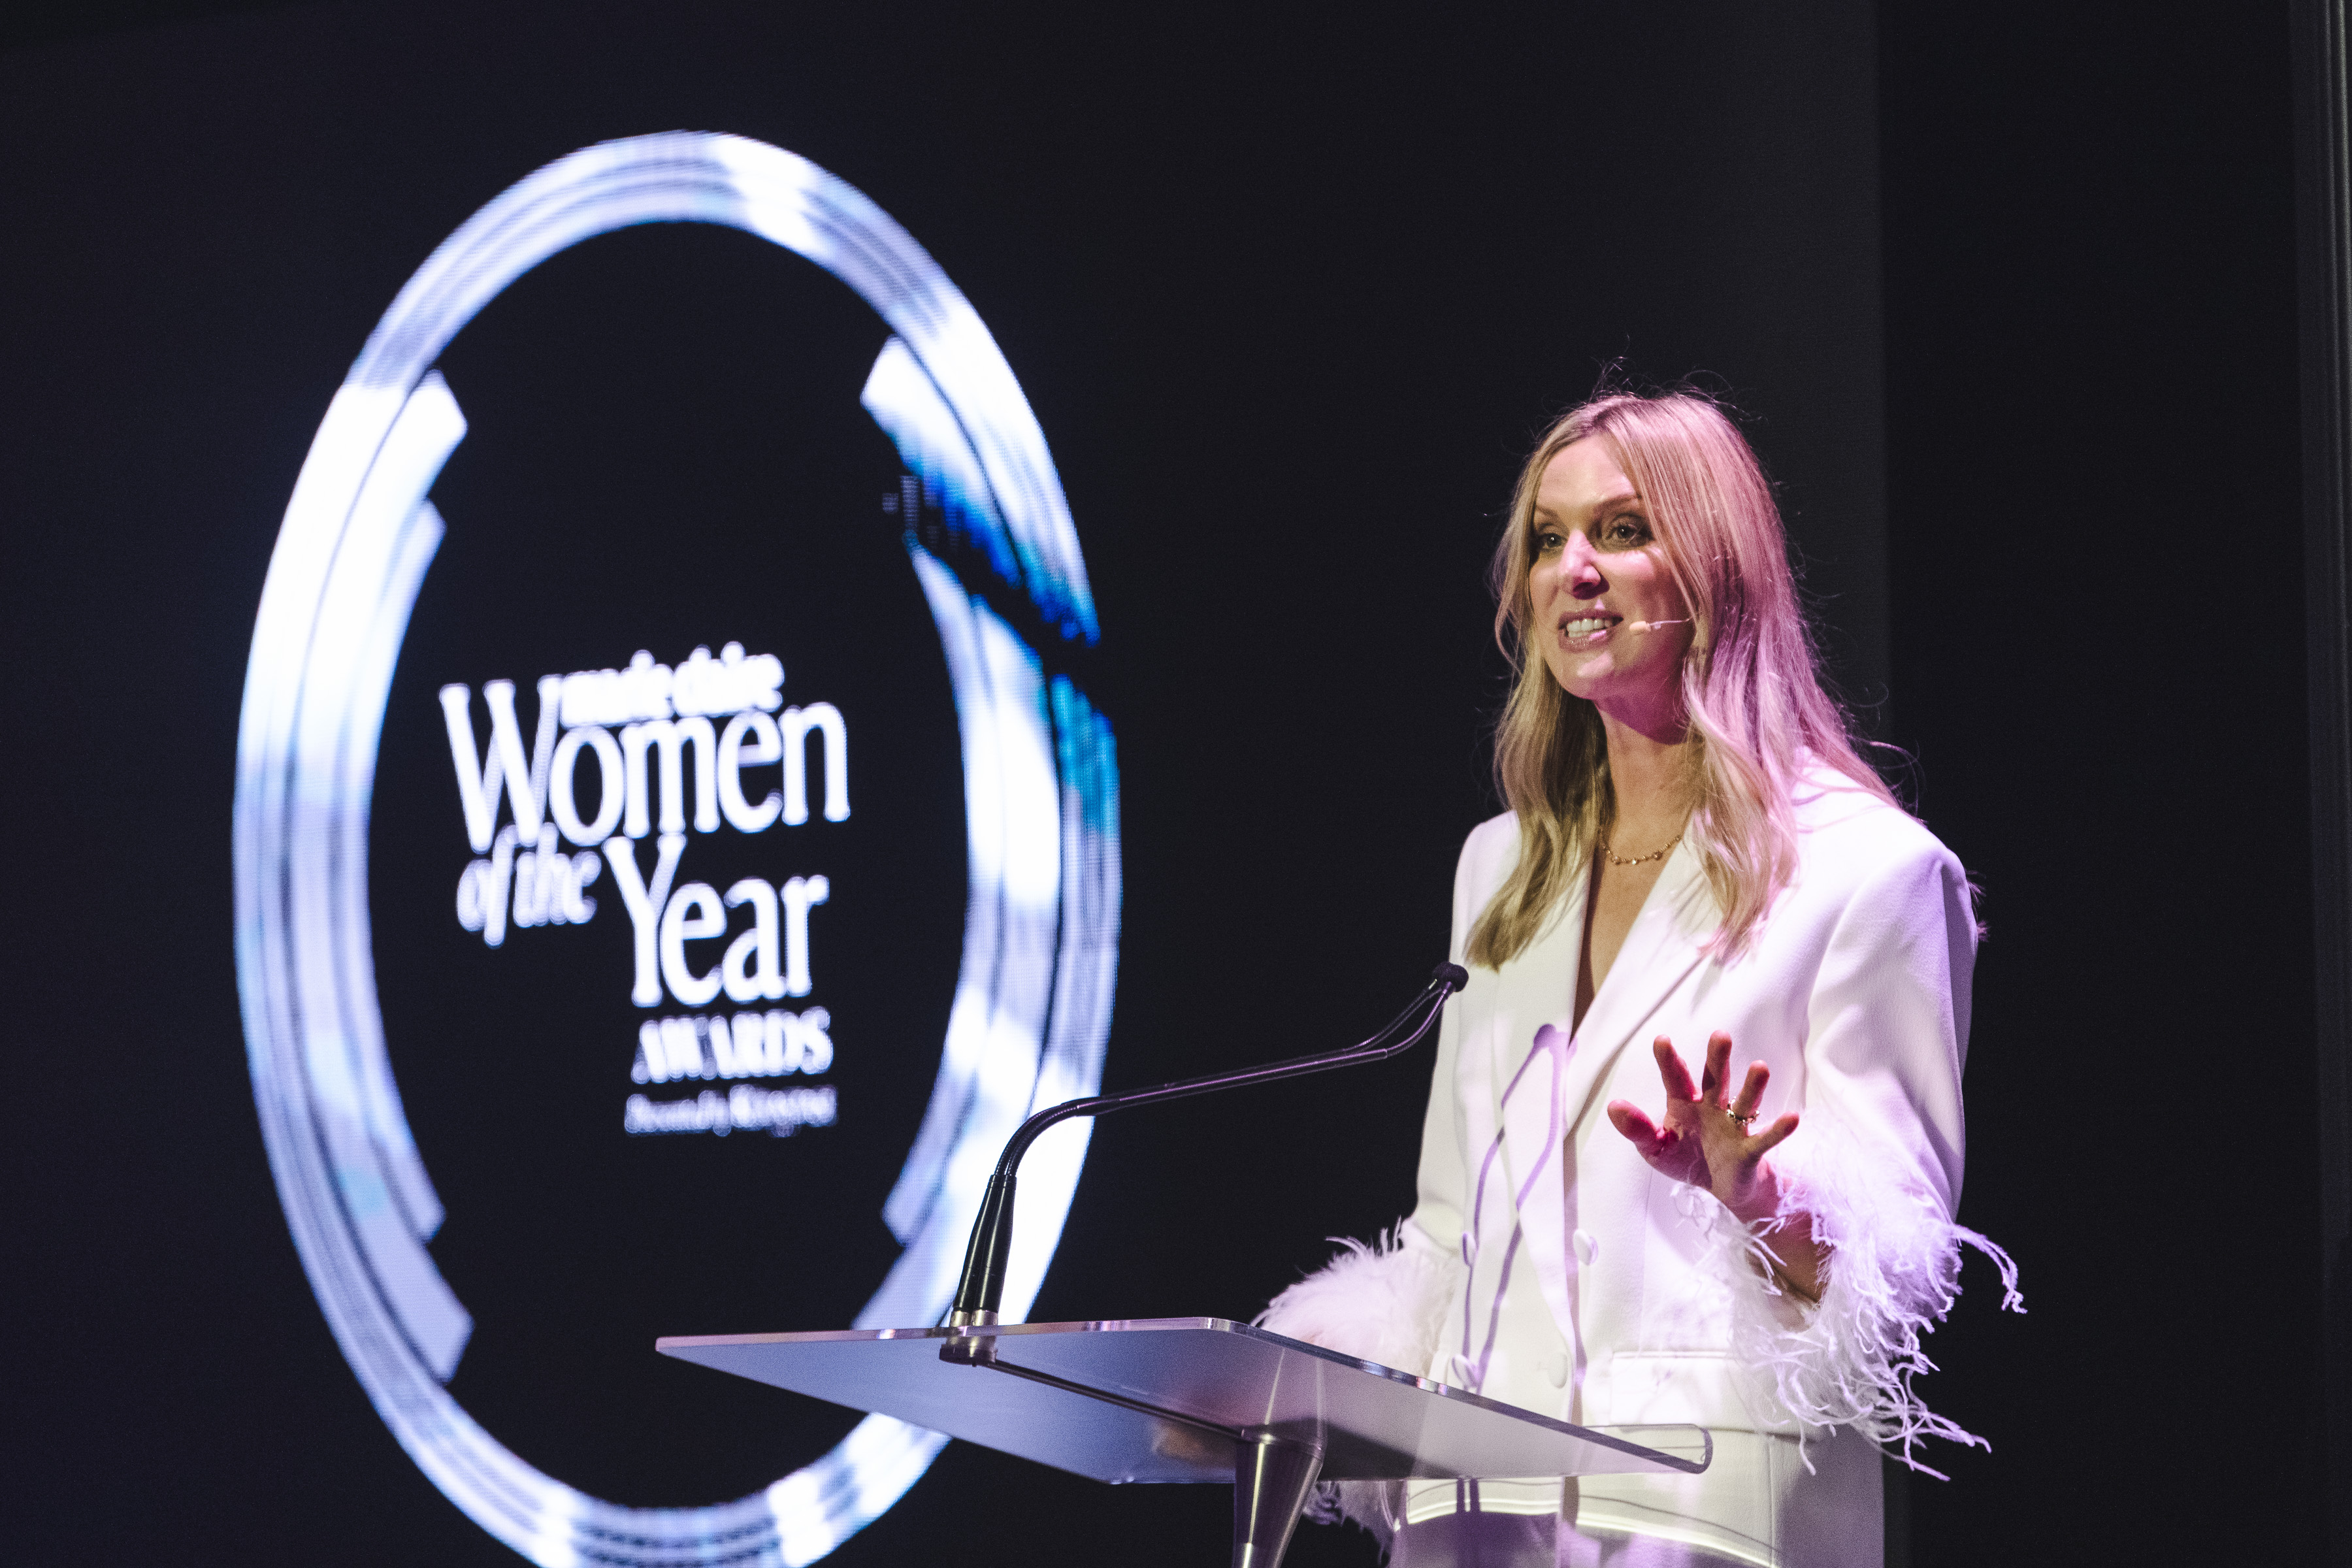 marie claire Women of The Year Awards (MCWOTY)